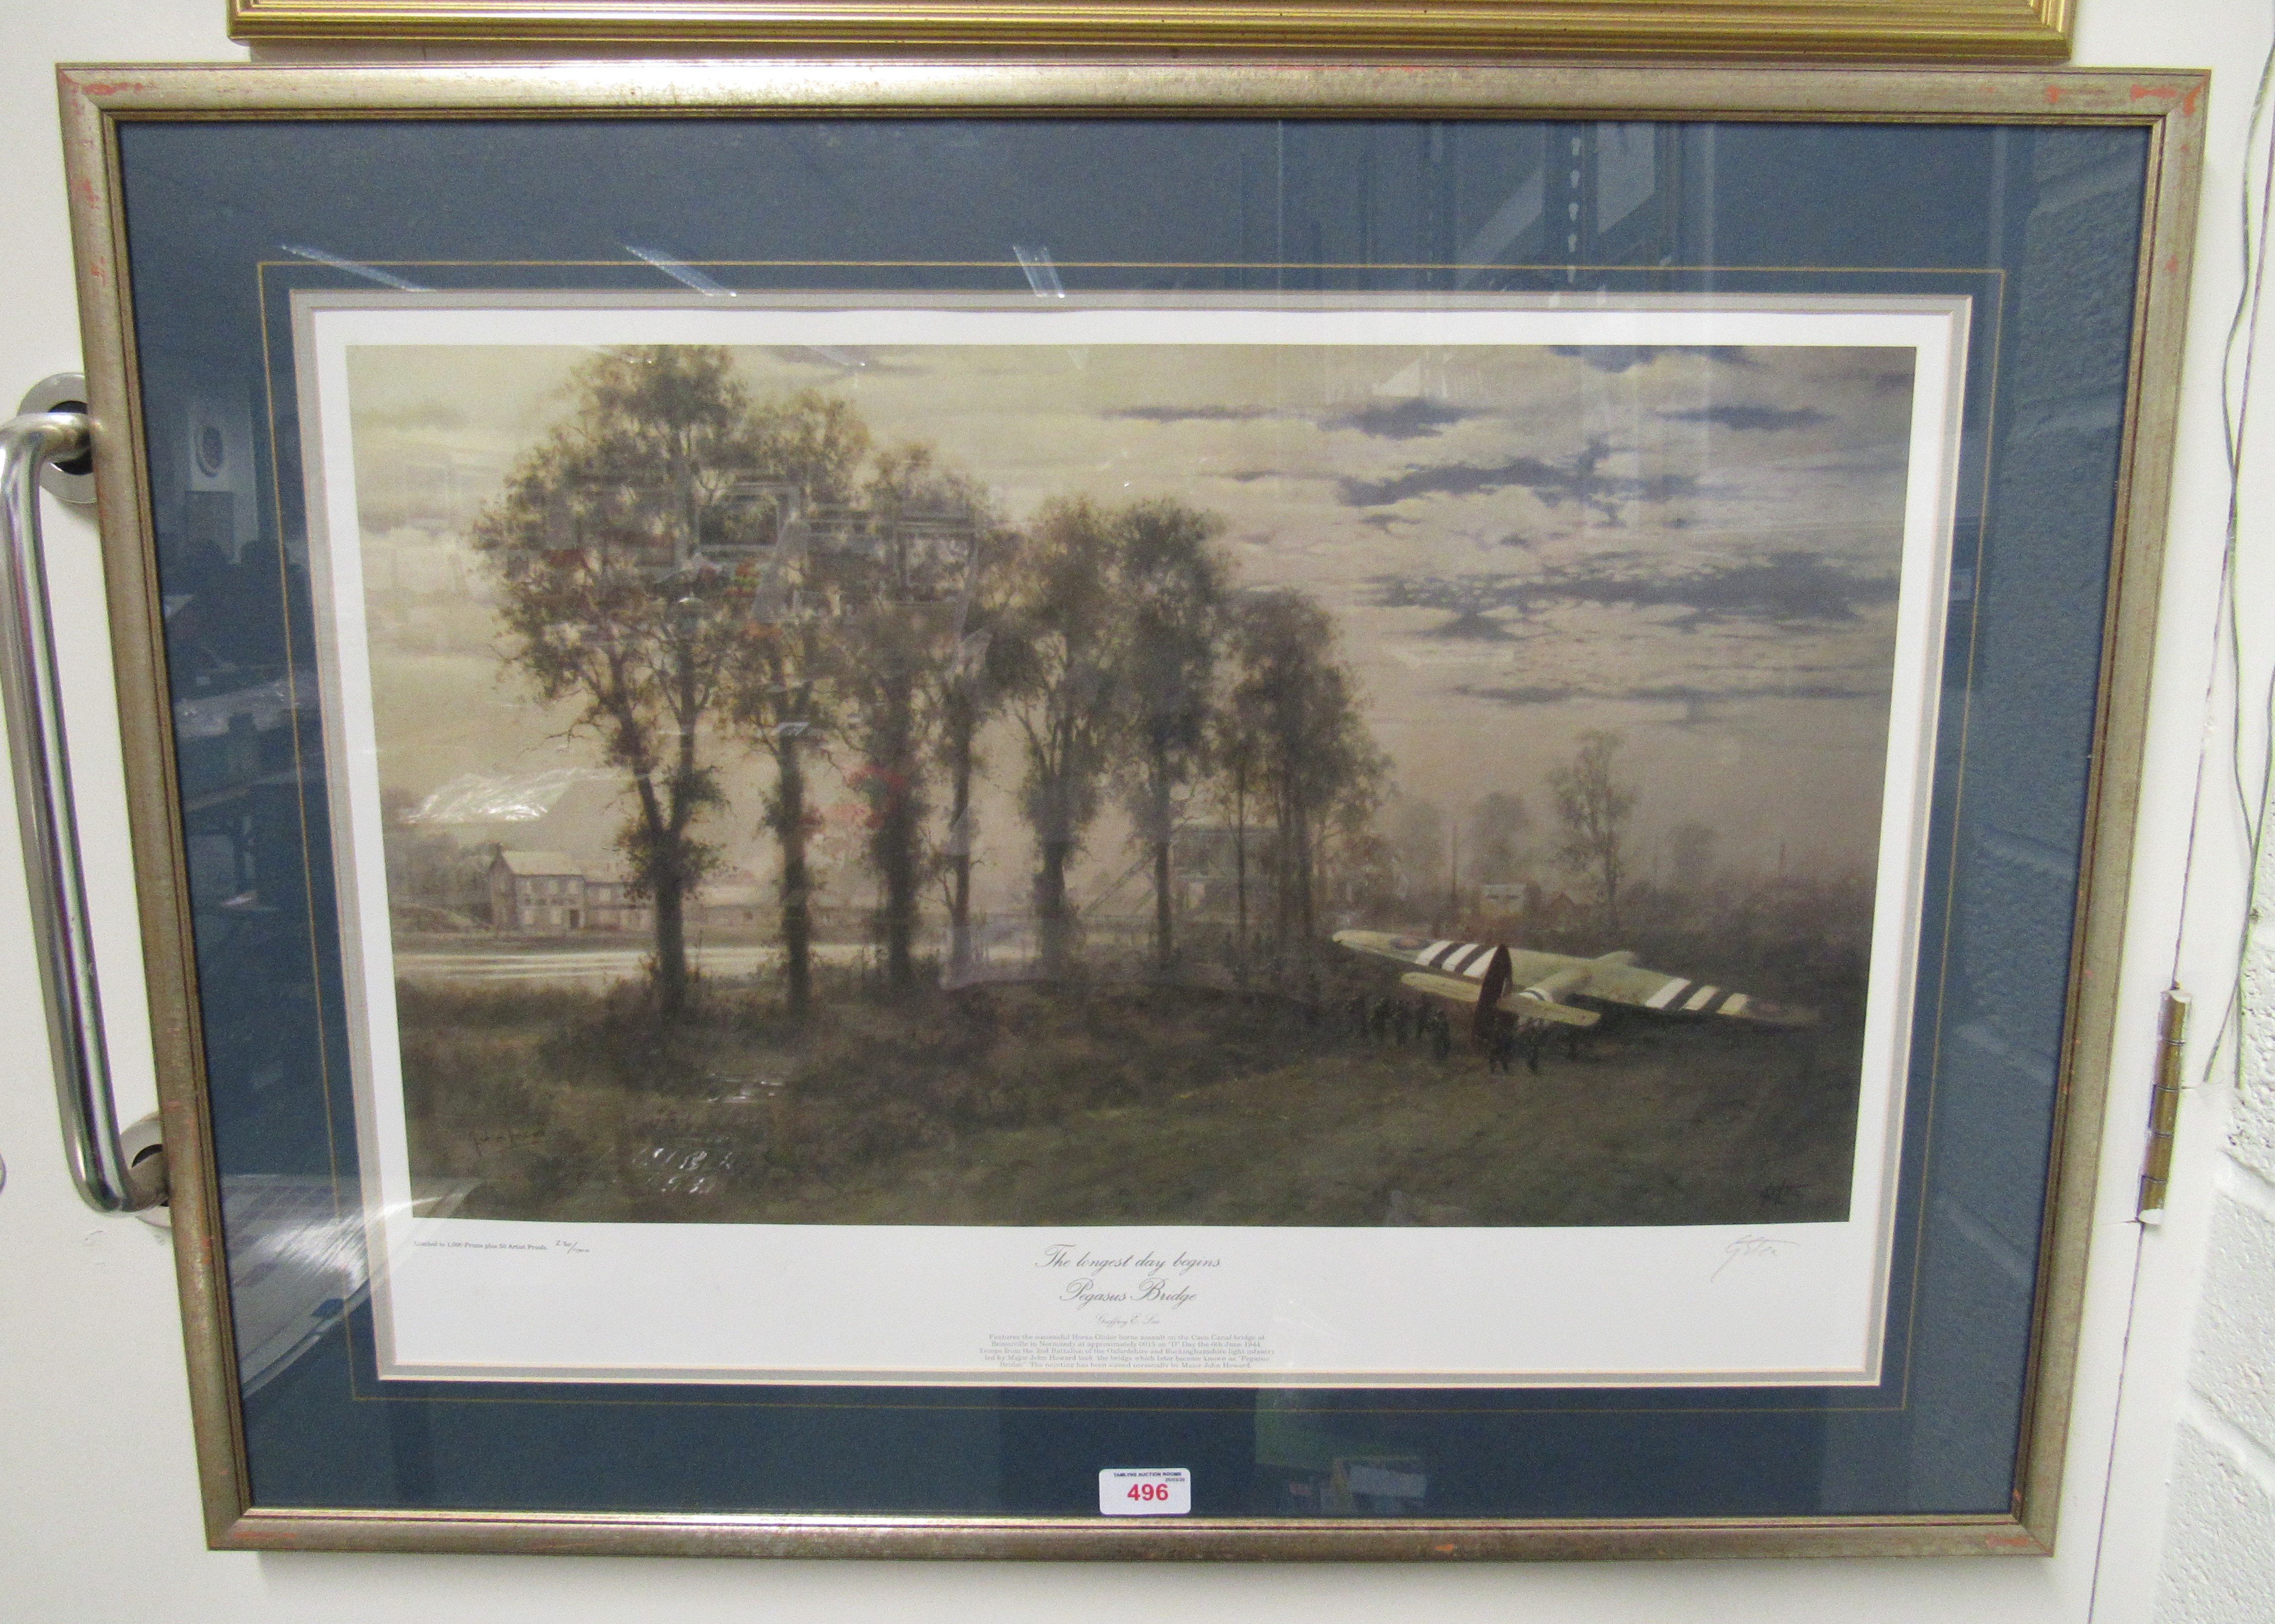 A framed and glazed limited print 230/1000 - 'The Longest Day Begins, Pegasus Bridge' by Geoffrey